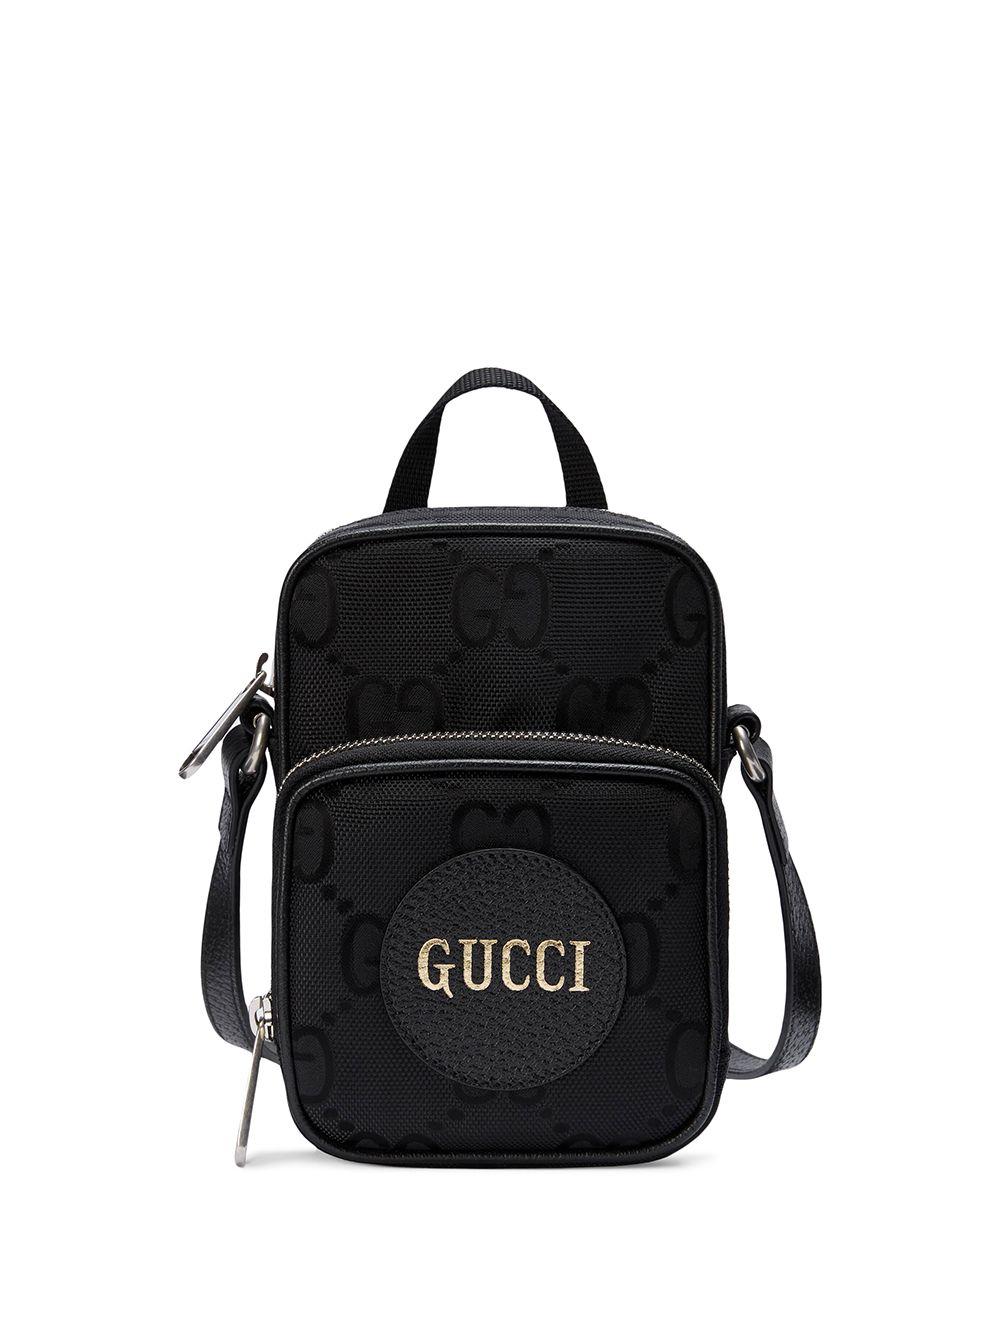 Gucci Leather Off The Grid Mini Bag in Black for Men - Lyst